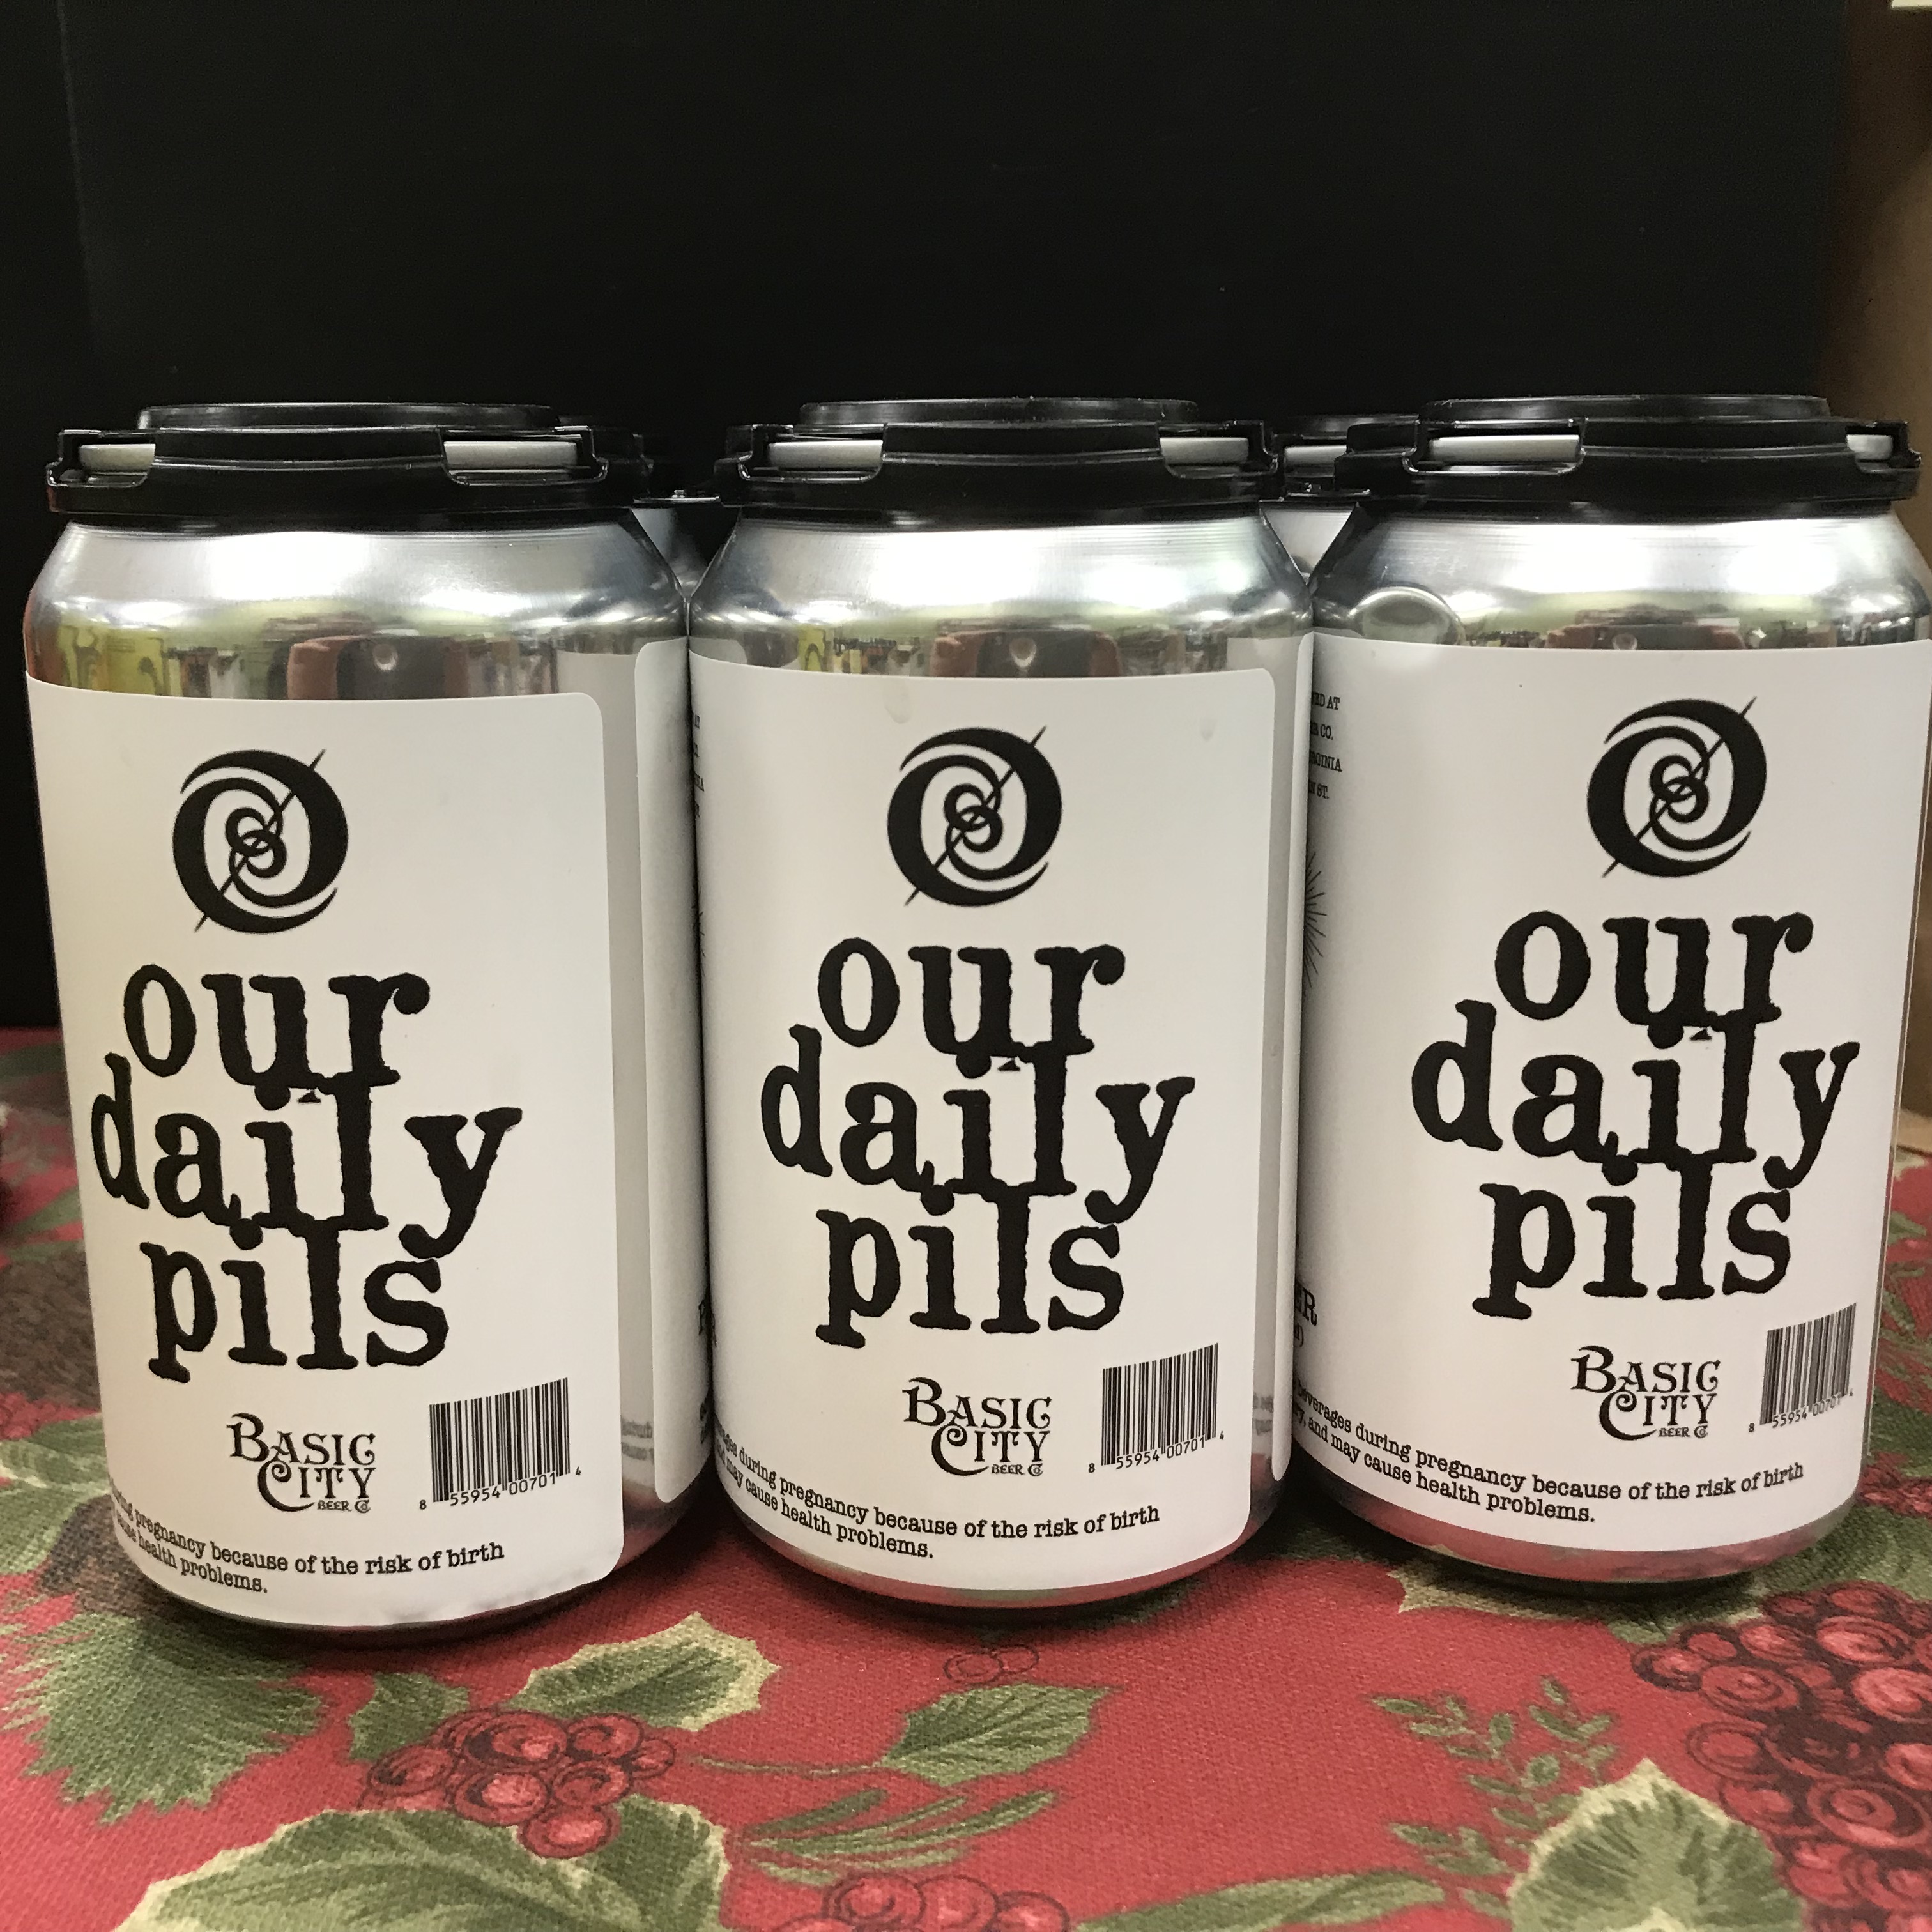 Basic City Our Daily Pils 6 x 12oz cans